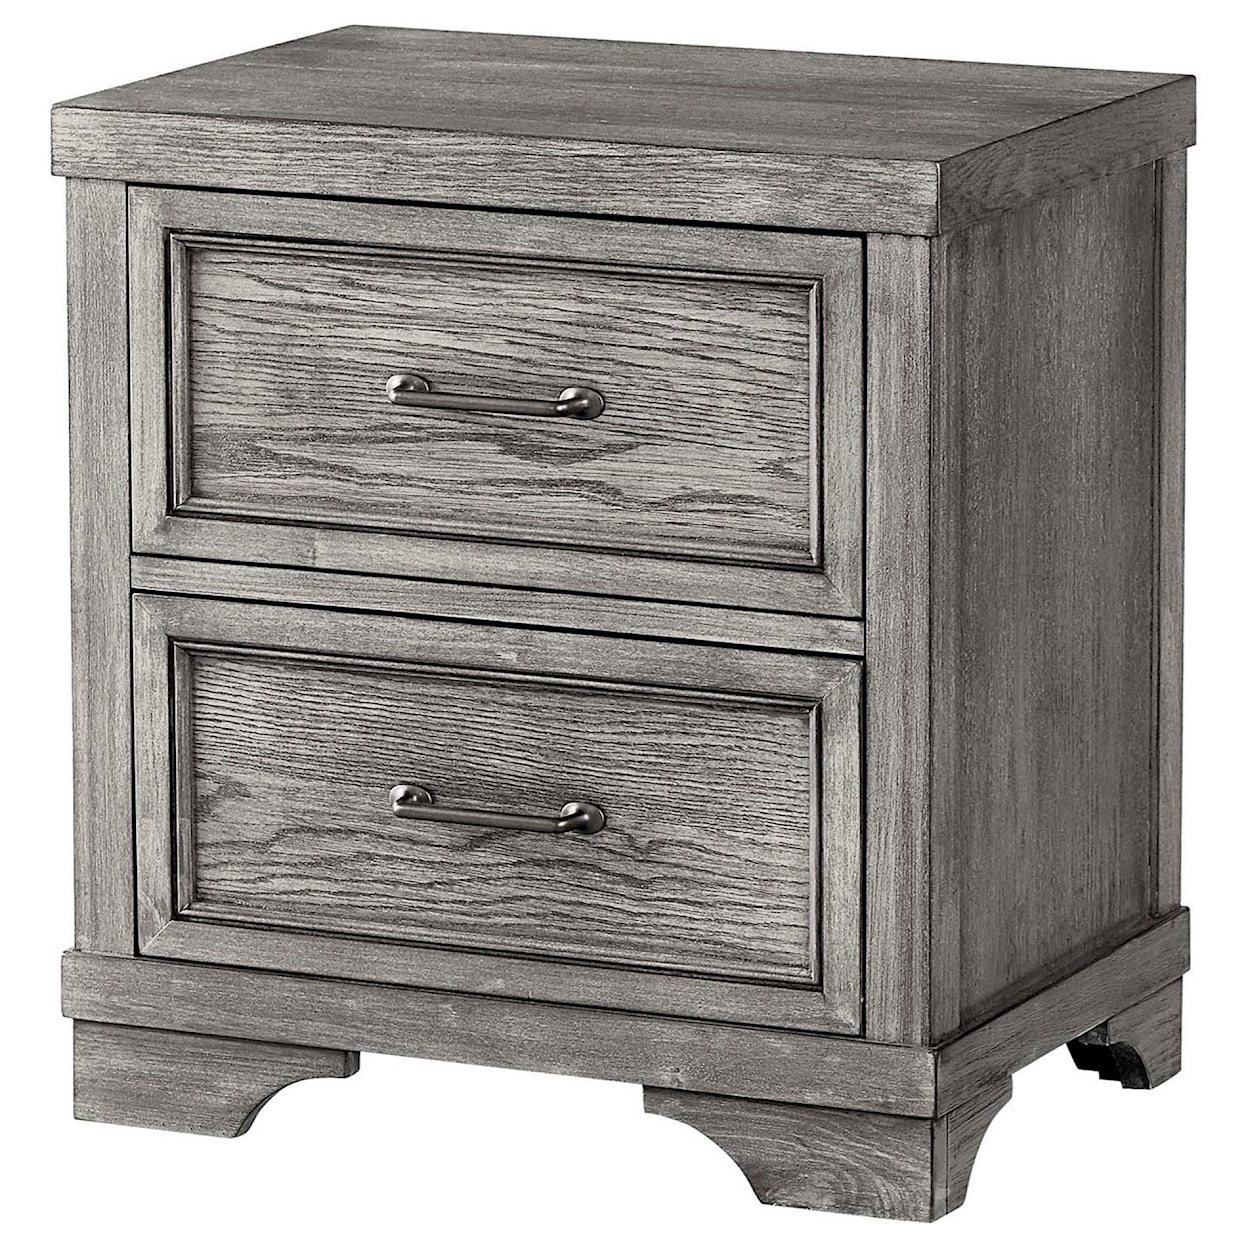 Westwood Design Foundry 2 Drawer Nightstand